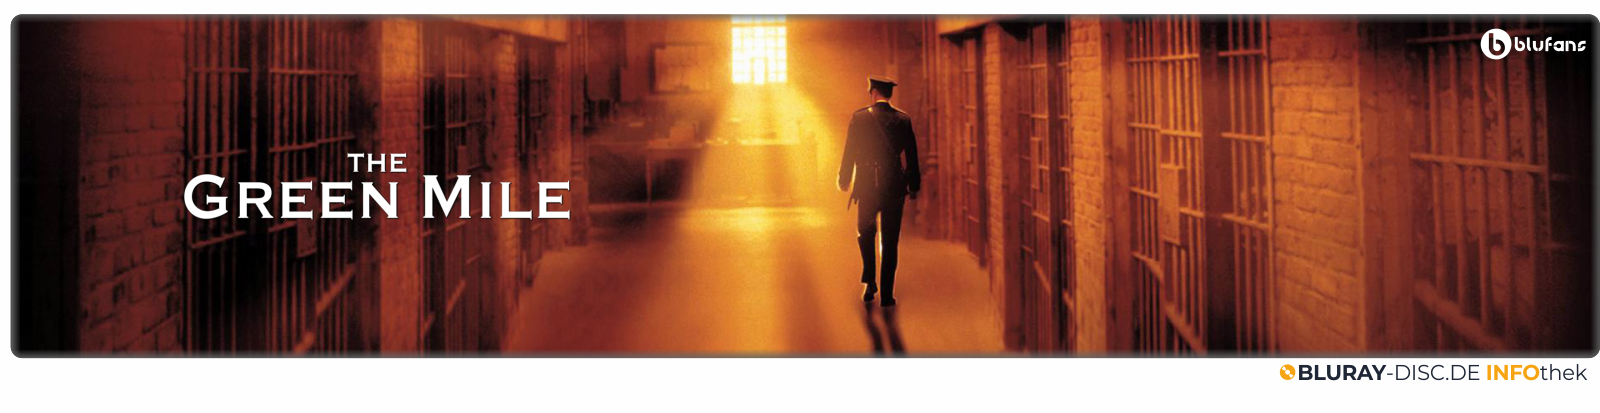 Moviebanner_Blufans_The_Green_Mile.png